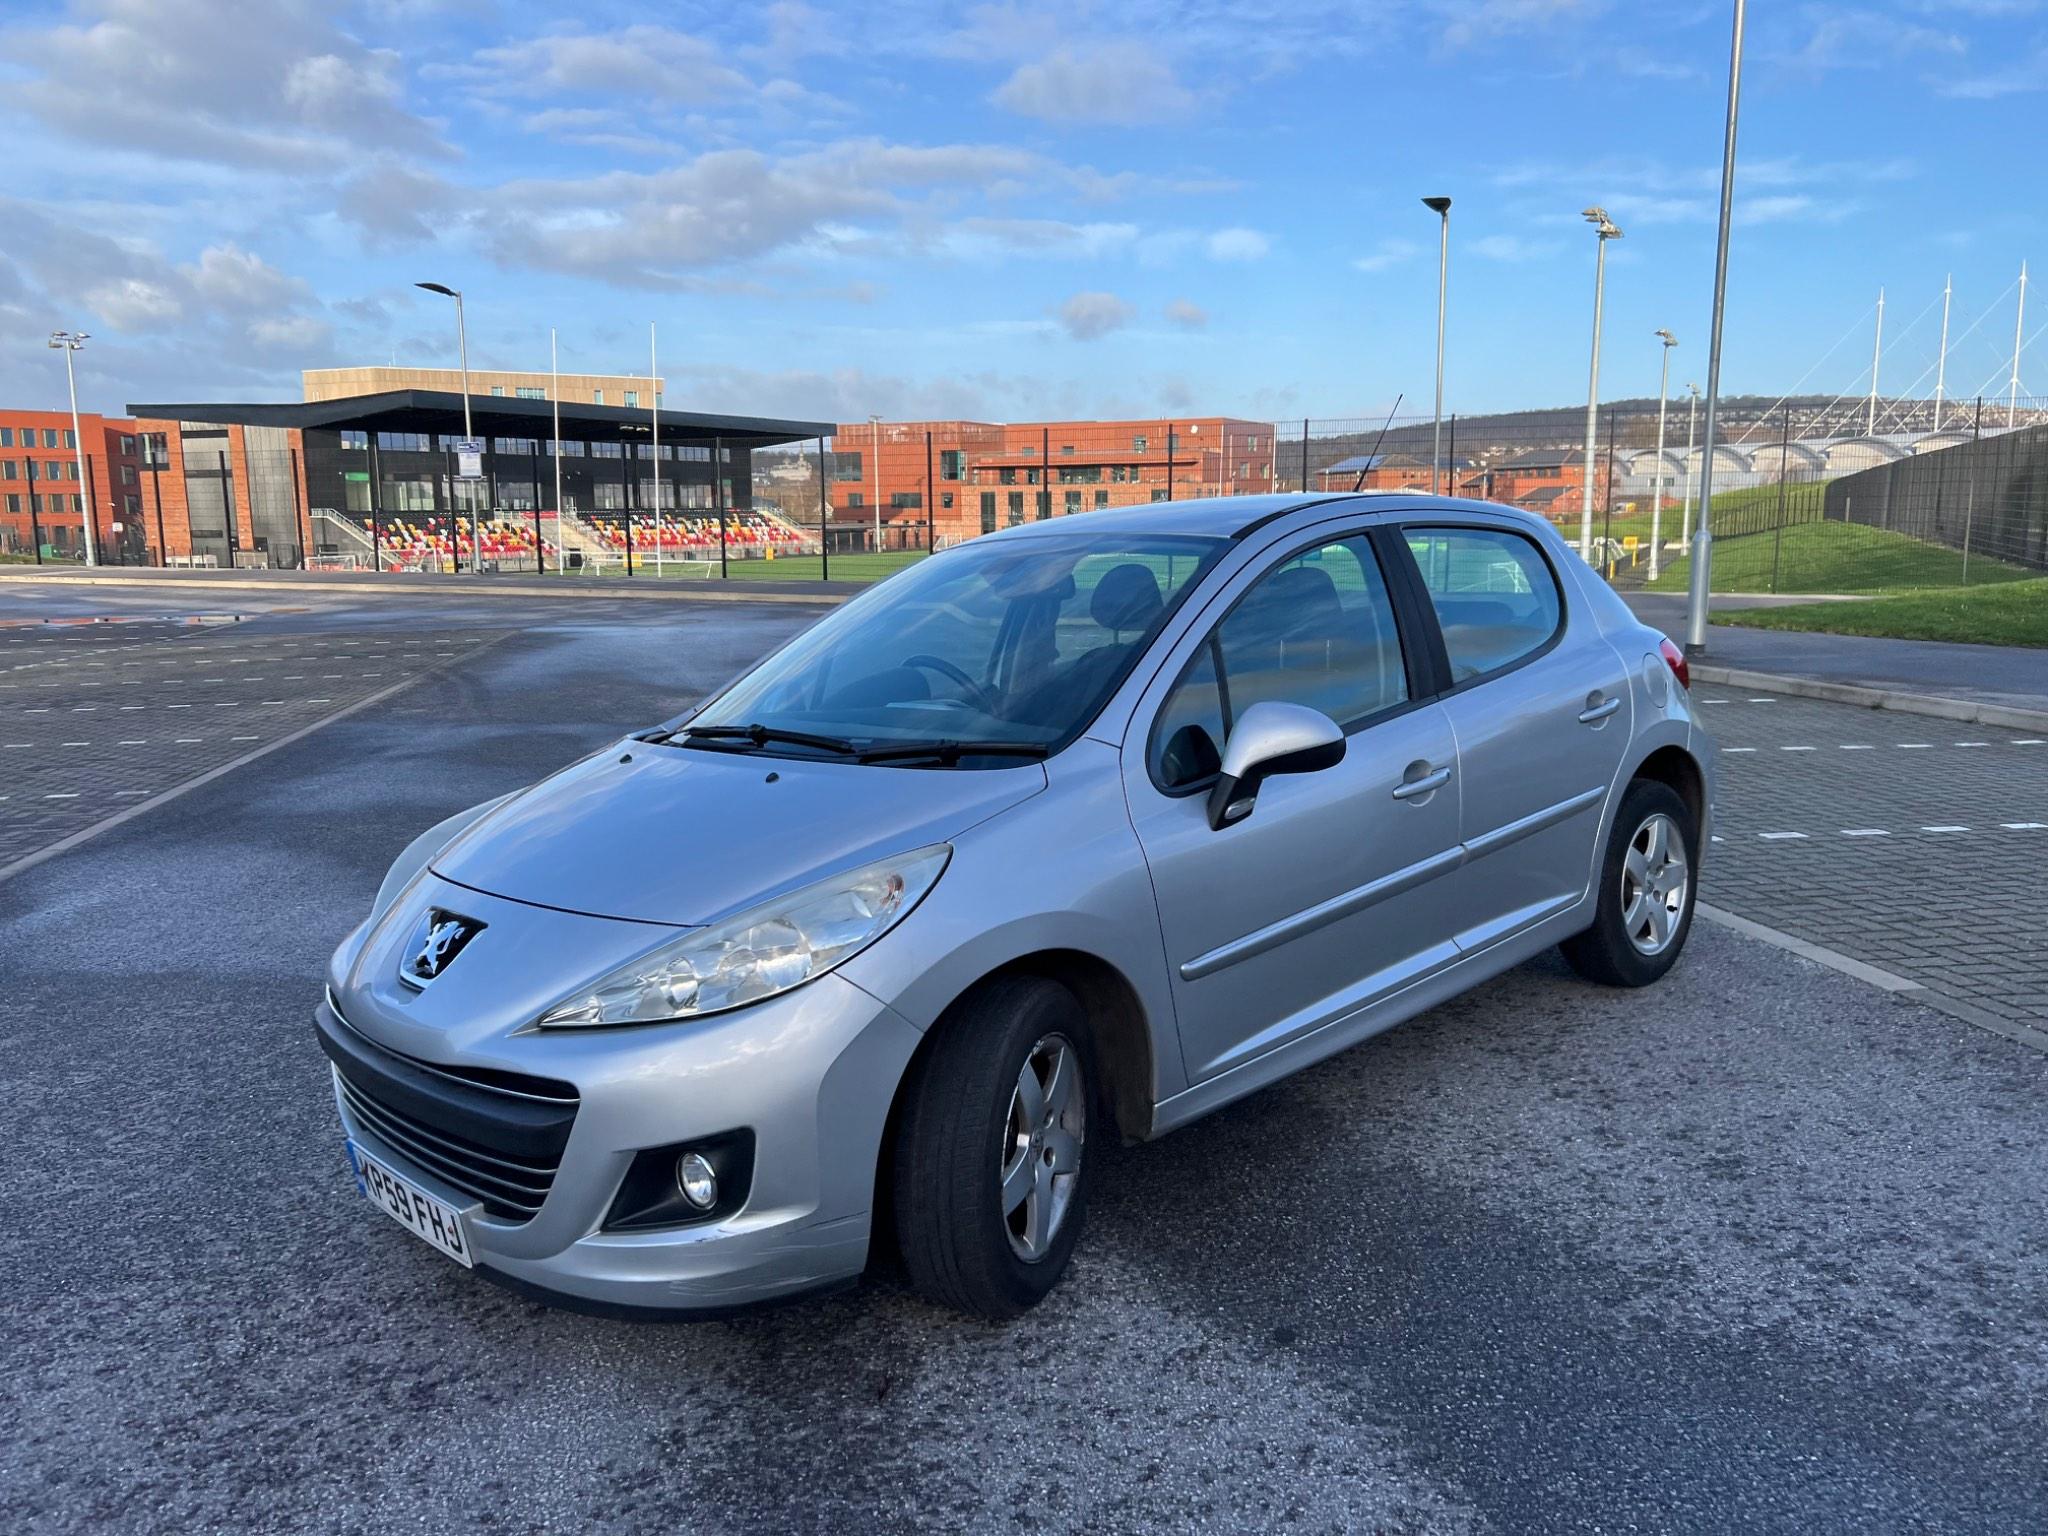 Used Peugeot 207 Review - 2006-2012